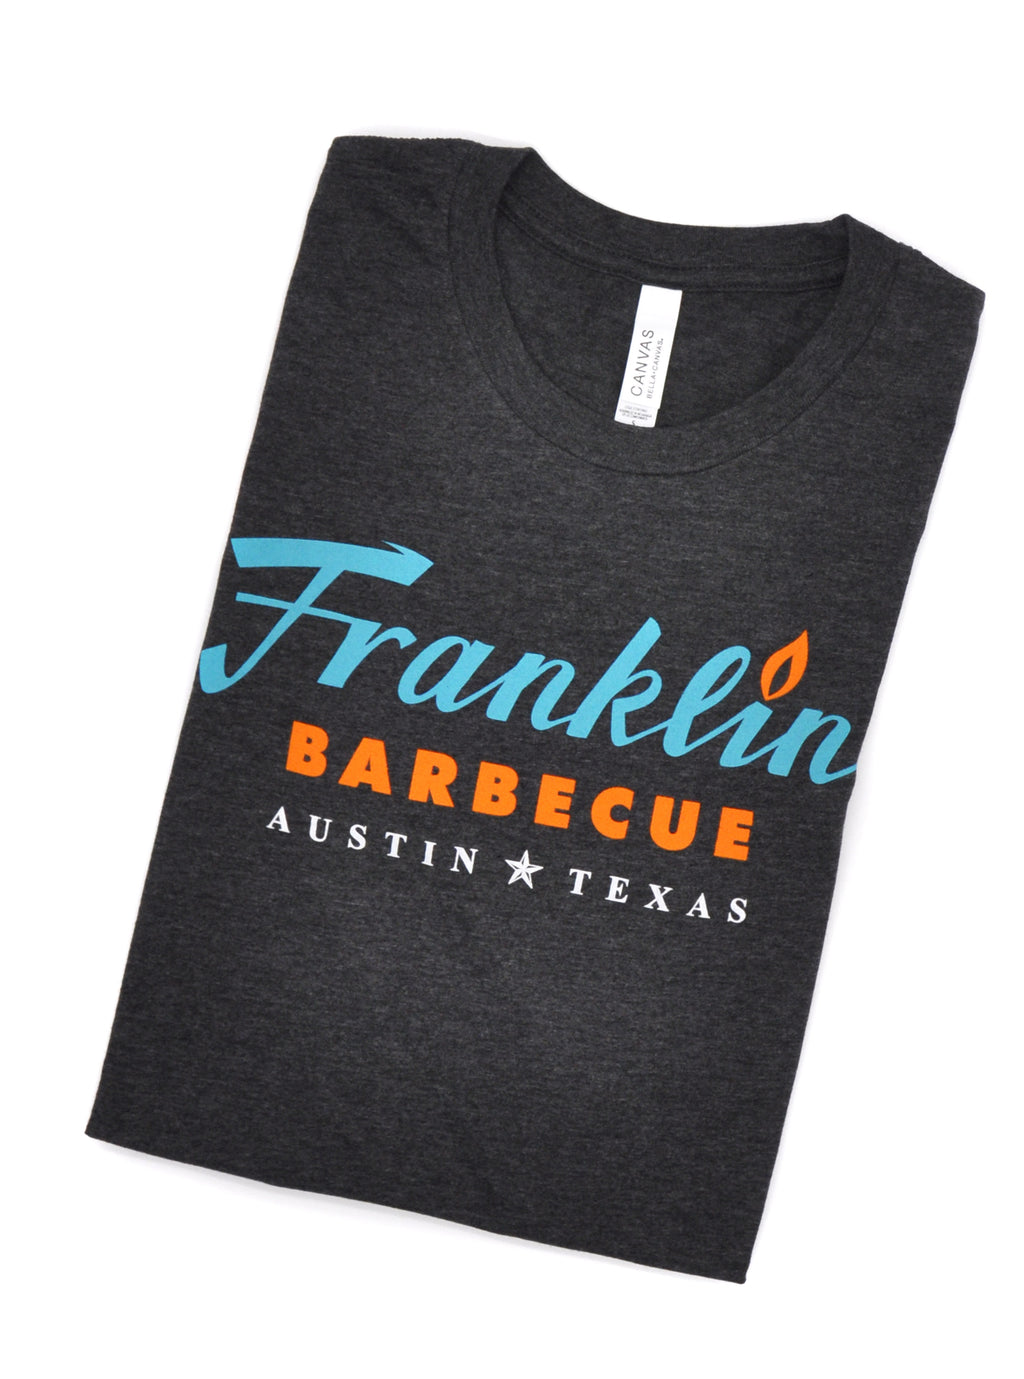 Grey t-shirt with Franklin Barbecue text logo in blue and orange. Below that is Austin Texas in white.